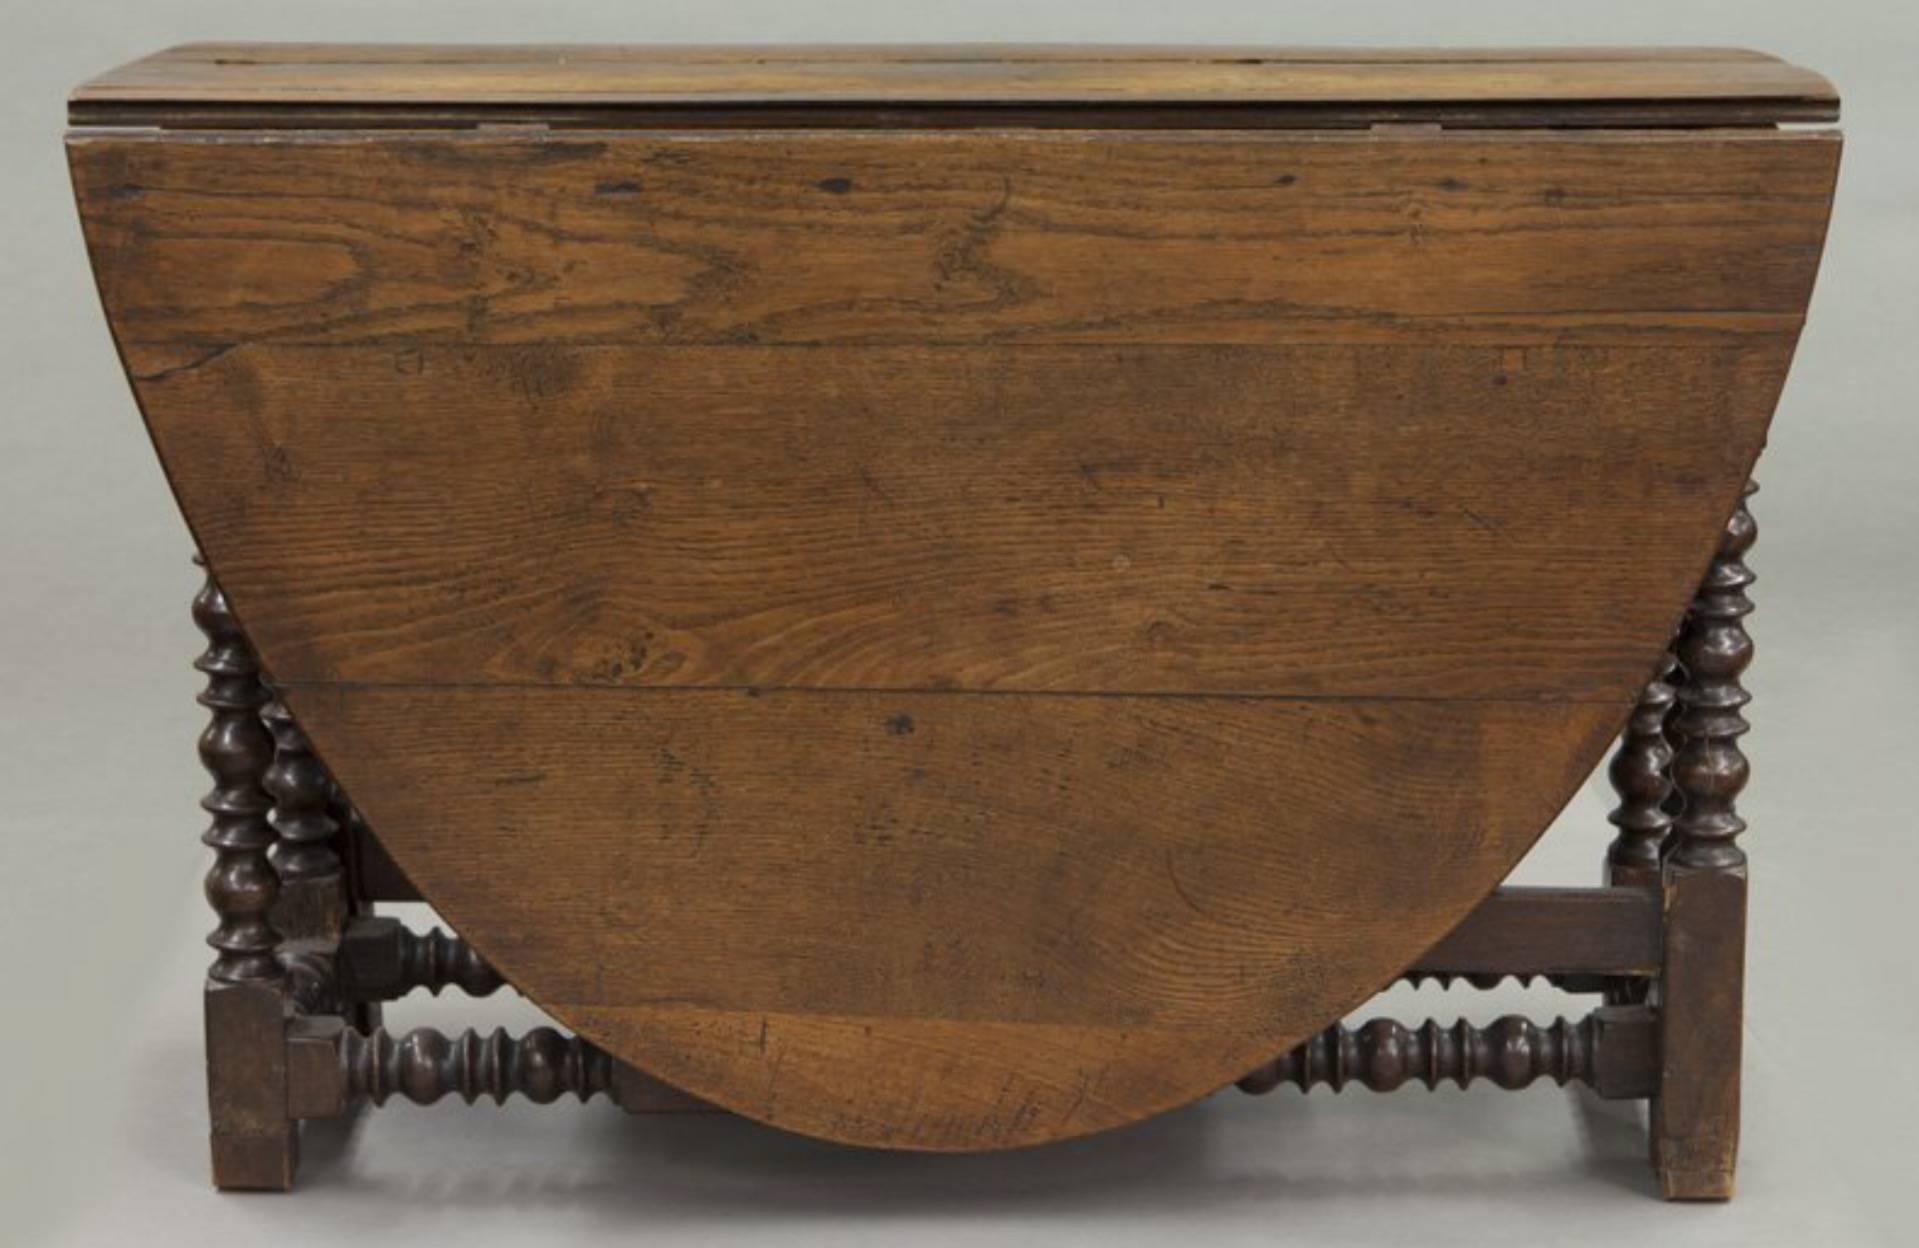 Large 18th century English oak oval gateleg table with spindle turned legs and stretchers. 

Measures: 29